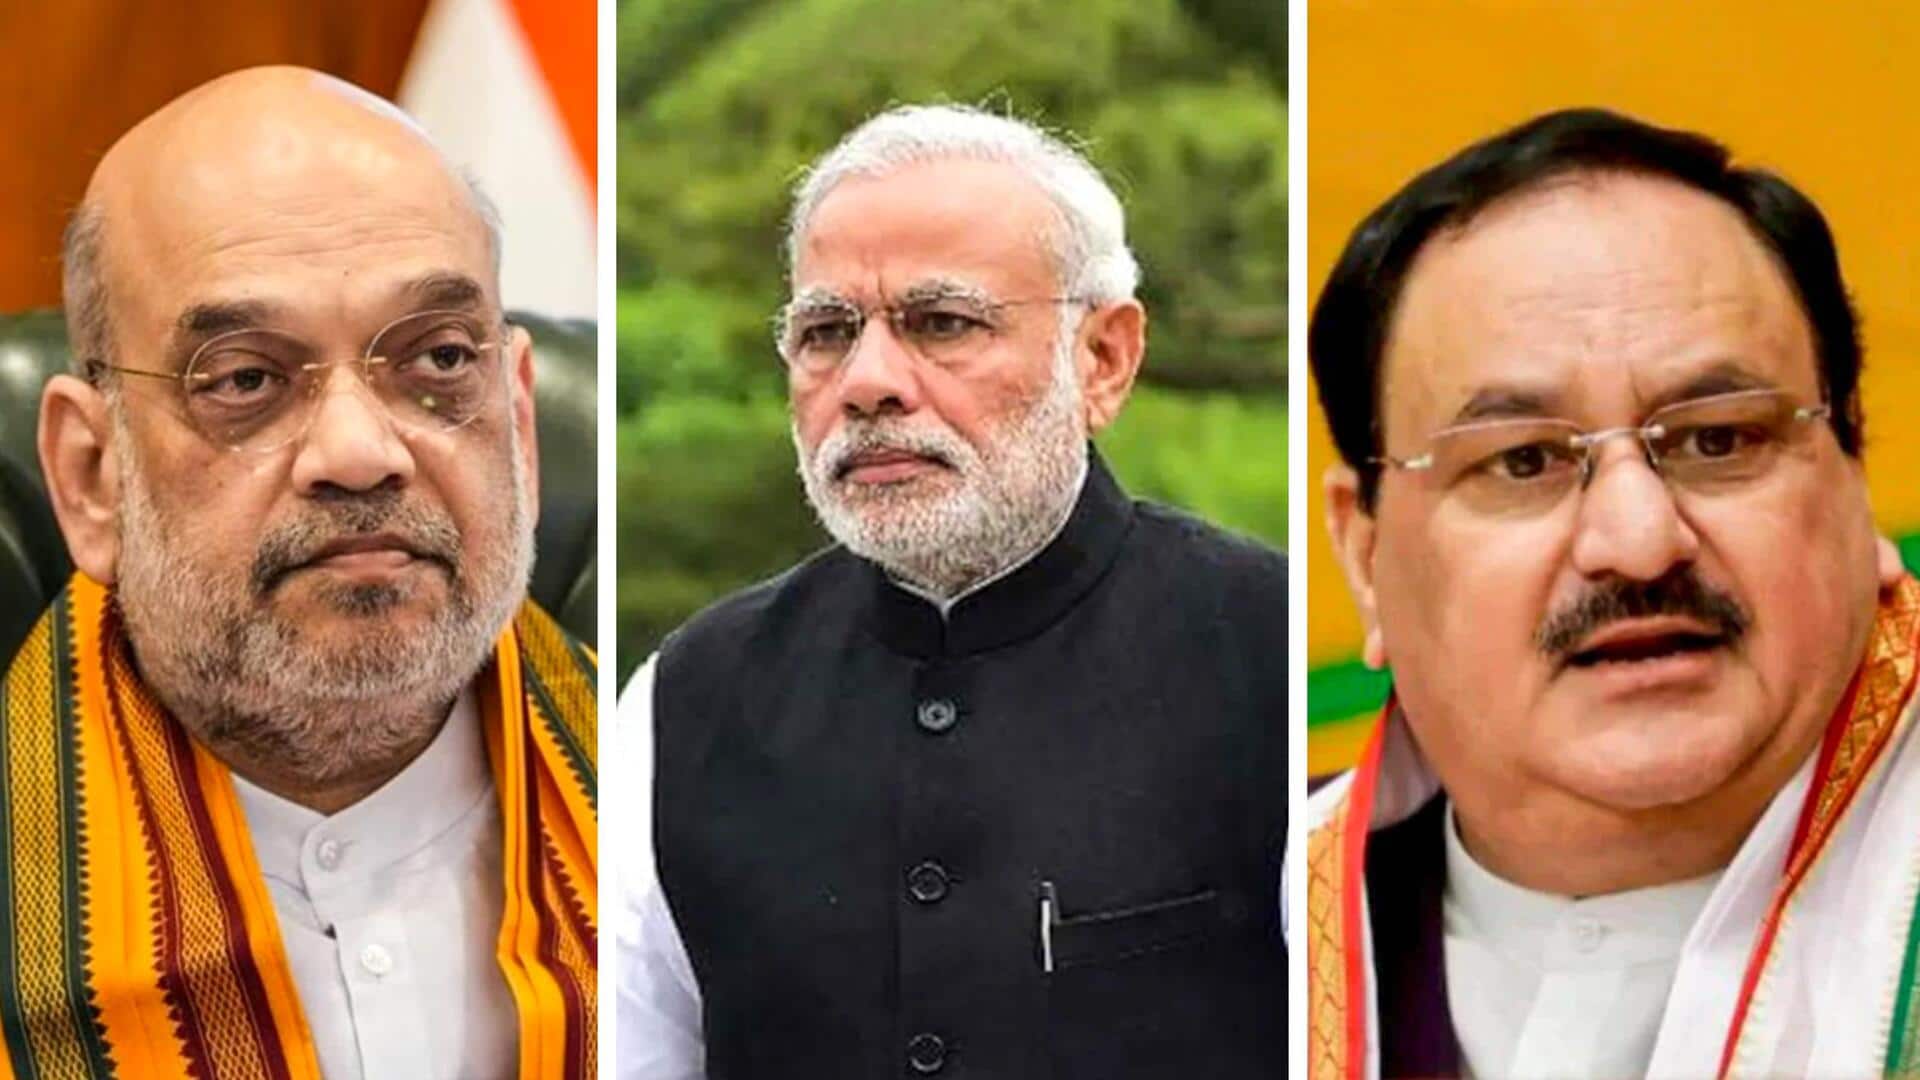 BJP may choose new faces as CMs in 3 states